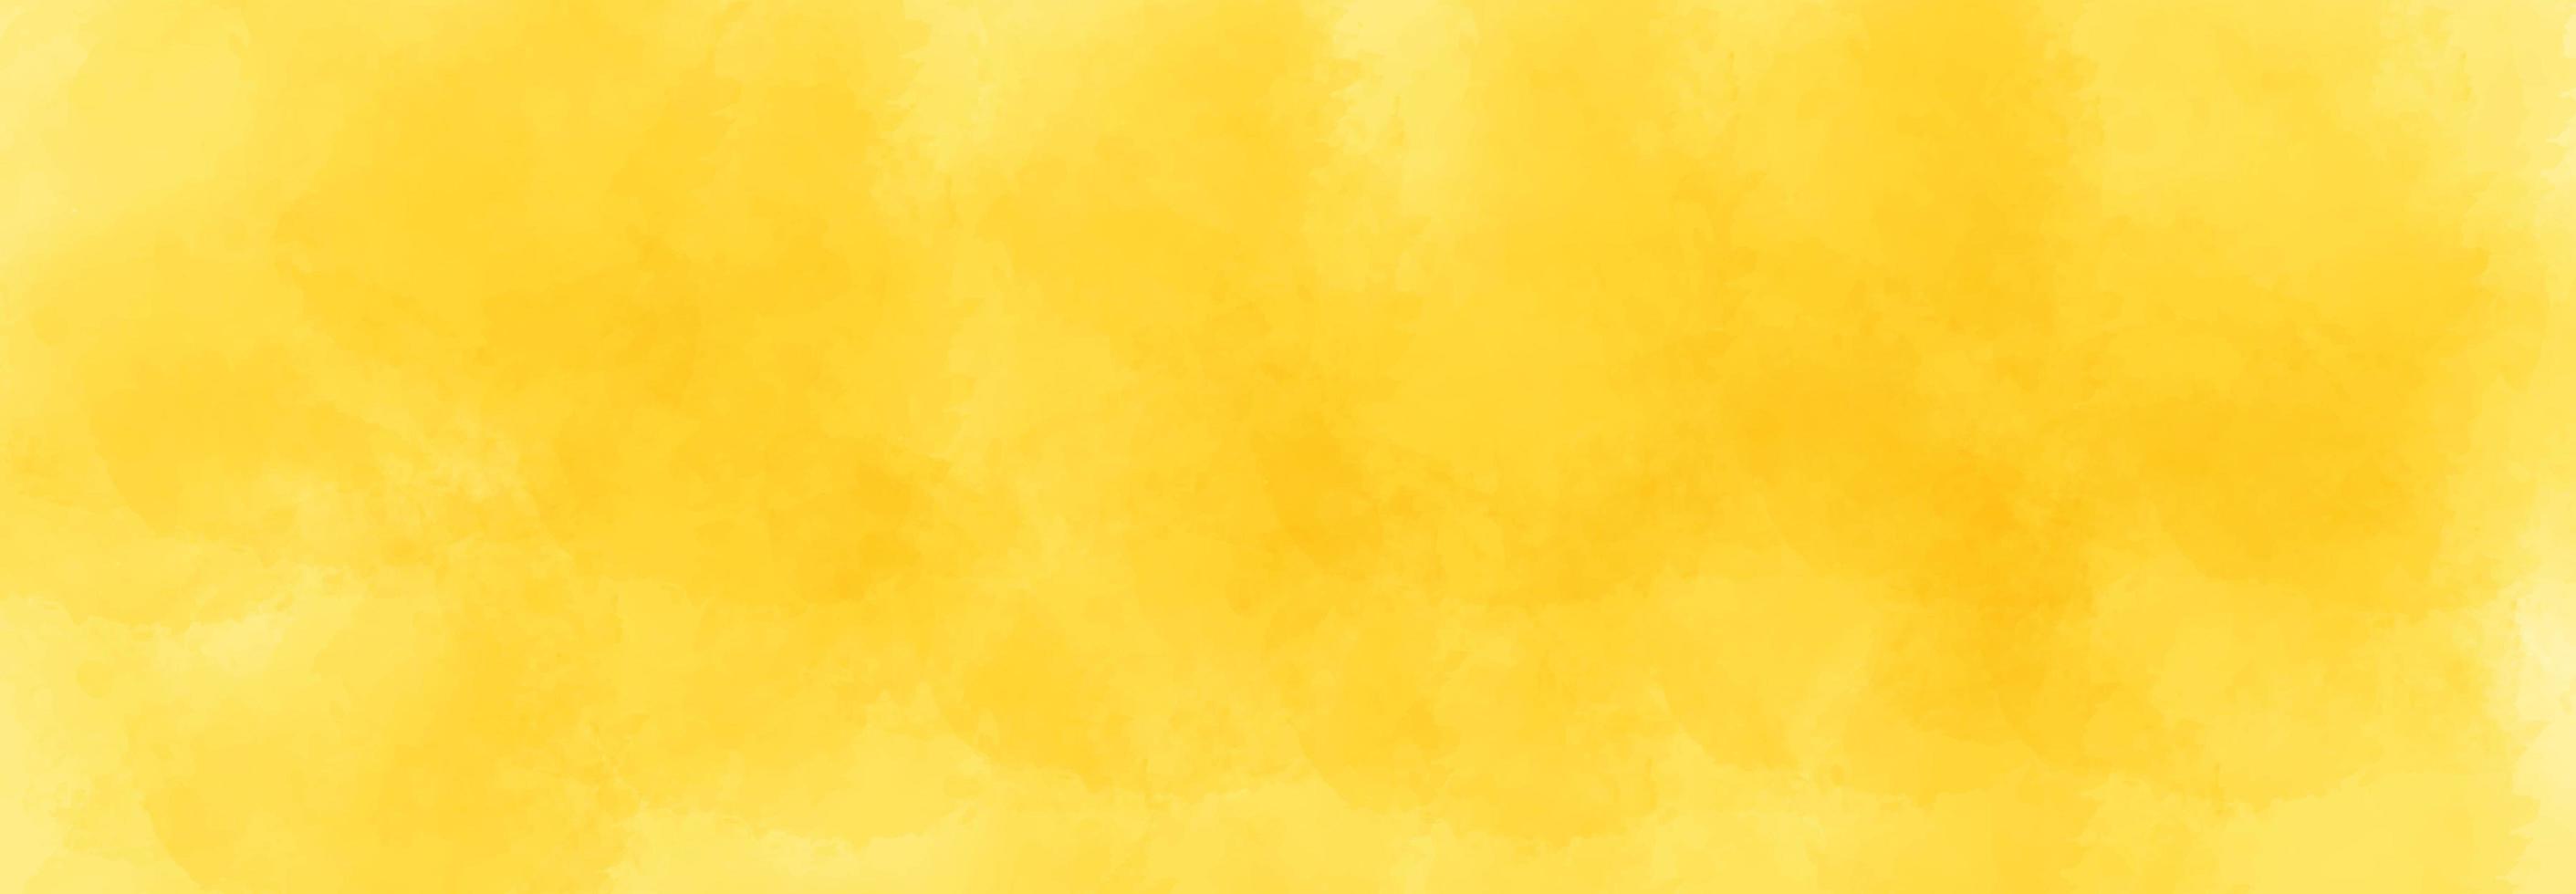 Yellow watercolor abstract background photo